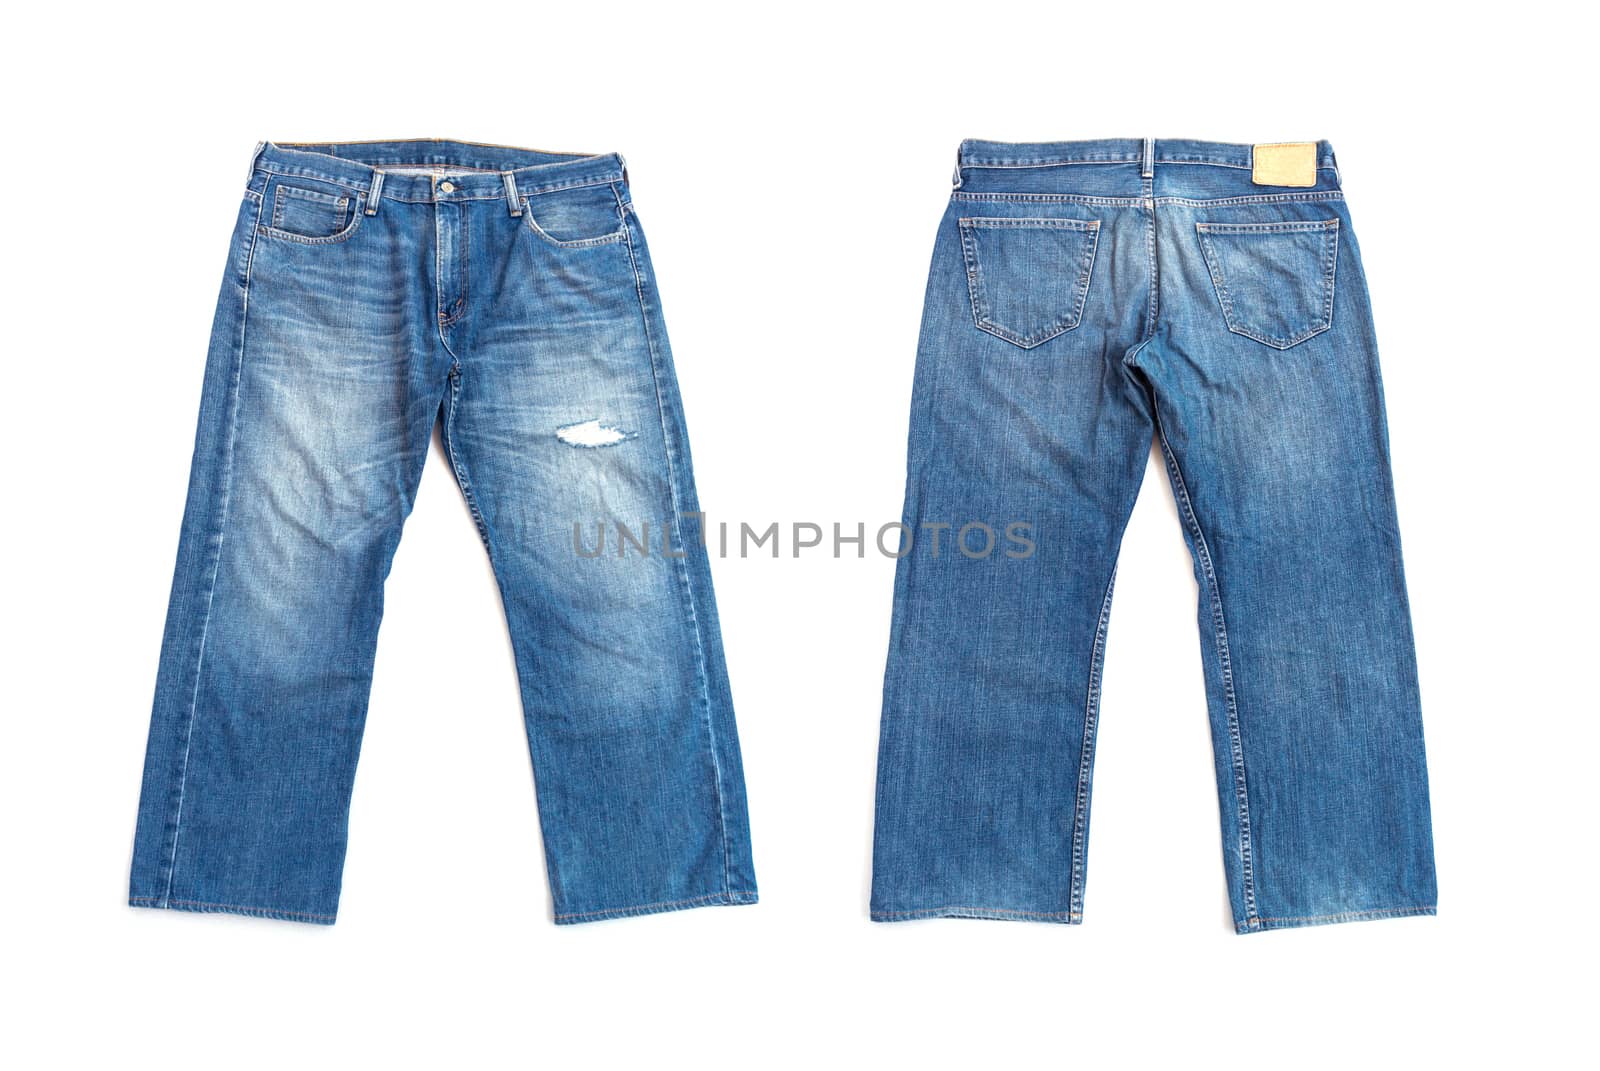 Blue jeans isolated on white background by rakoptonLPN